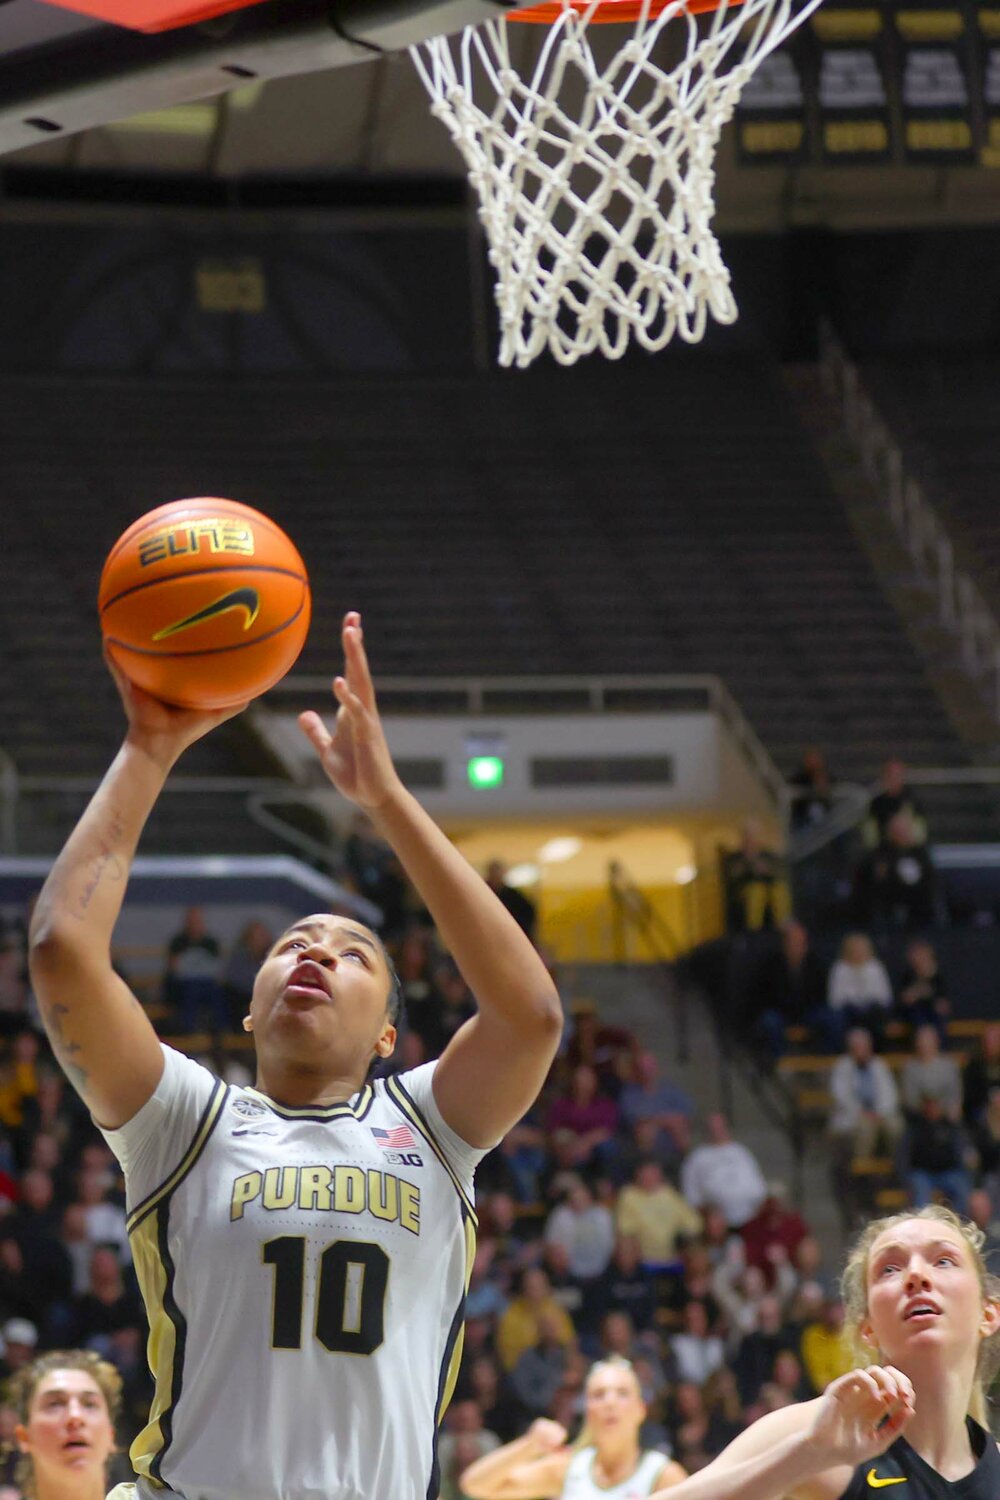 Jeanae Terry of Purdue - shooting a lay-up in the Vermont game